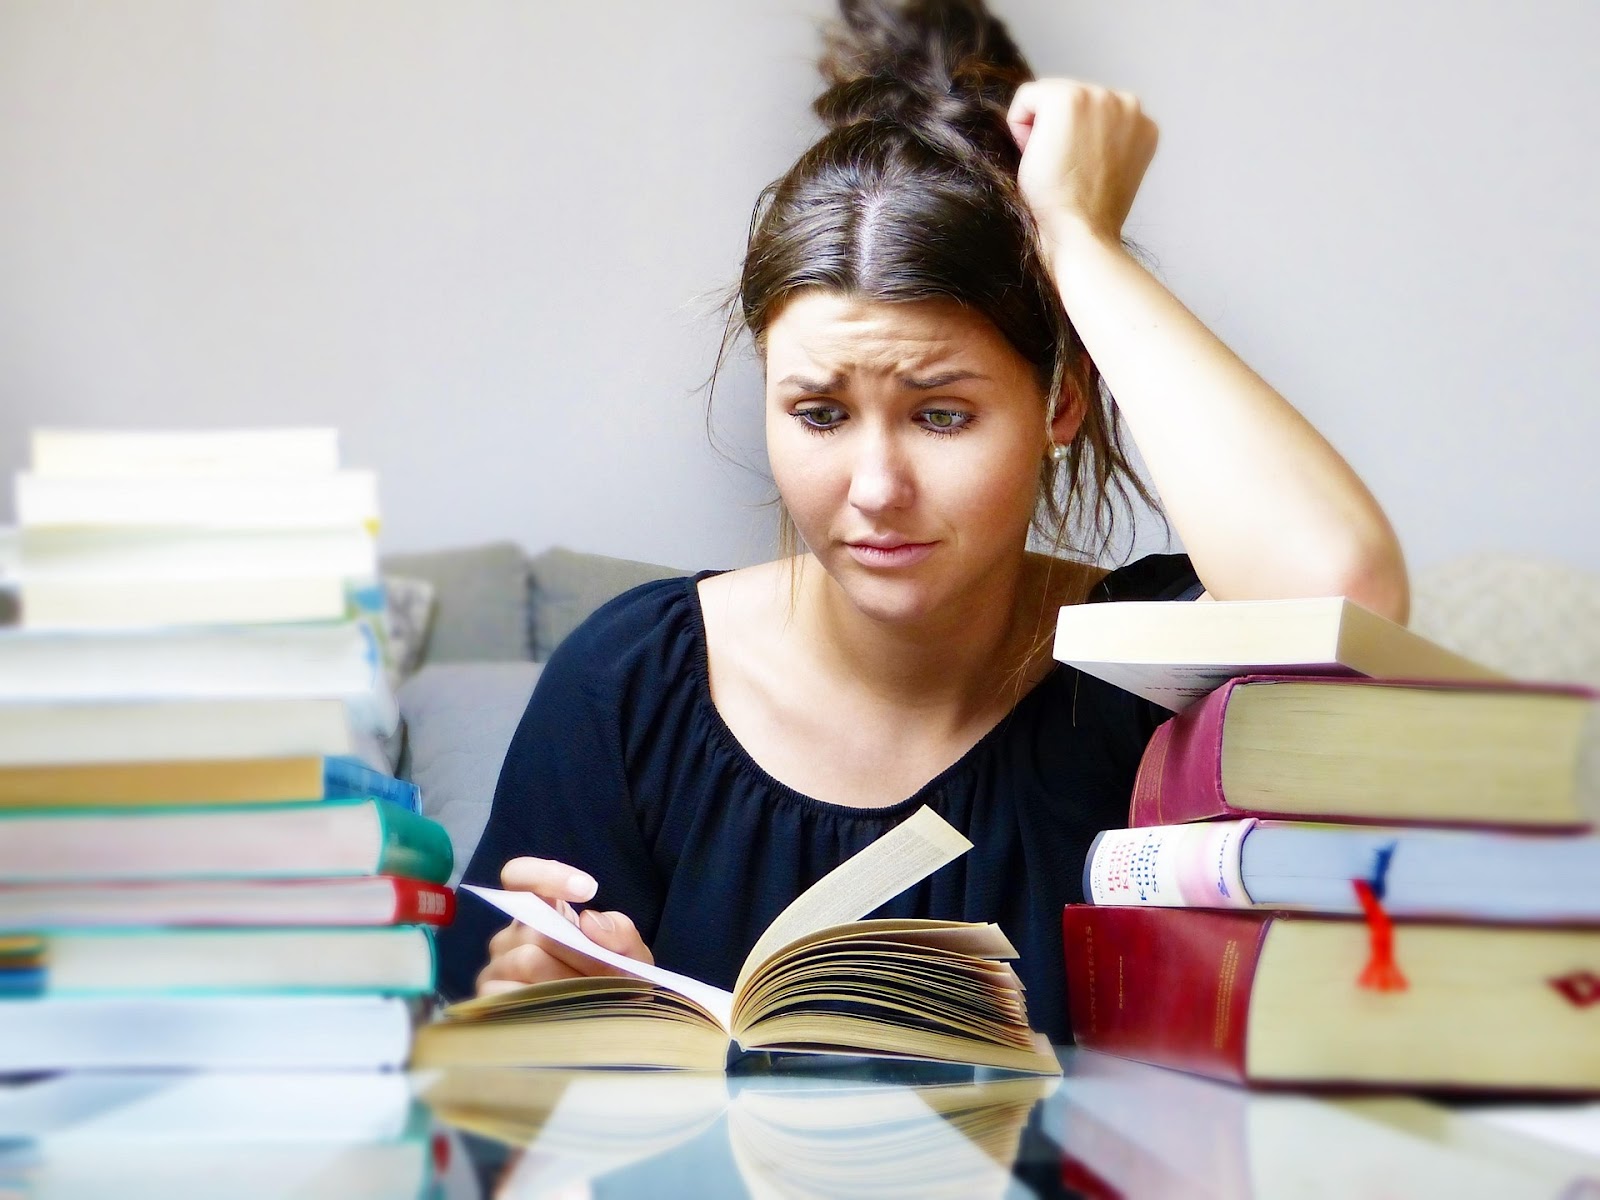 Young woman studying with piles of books around her.